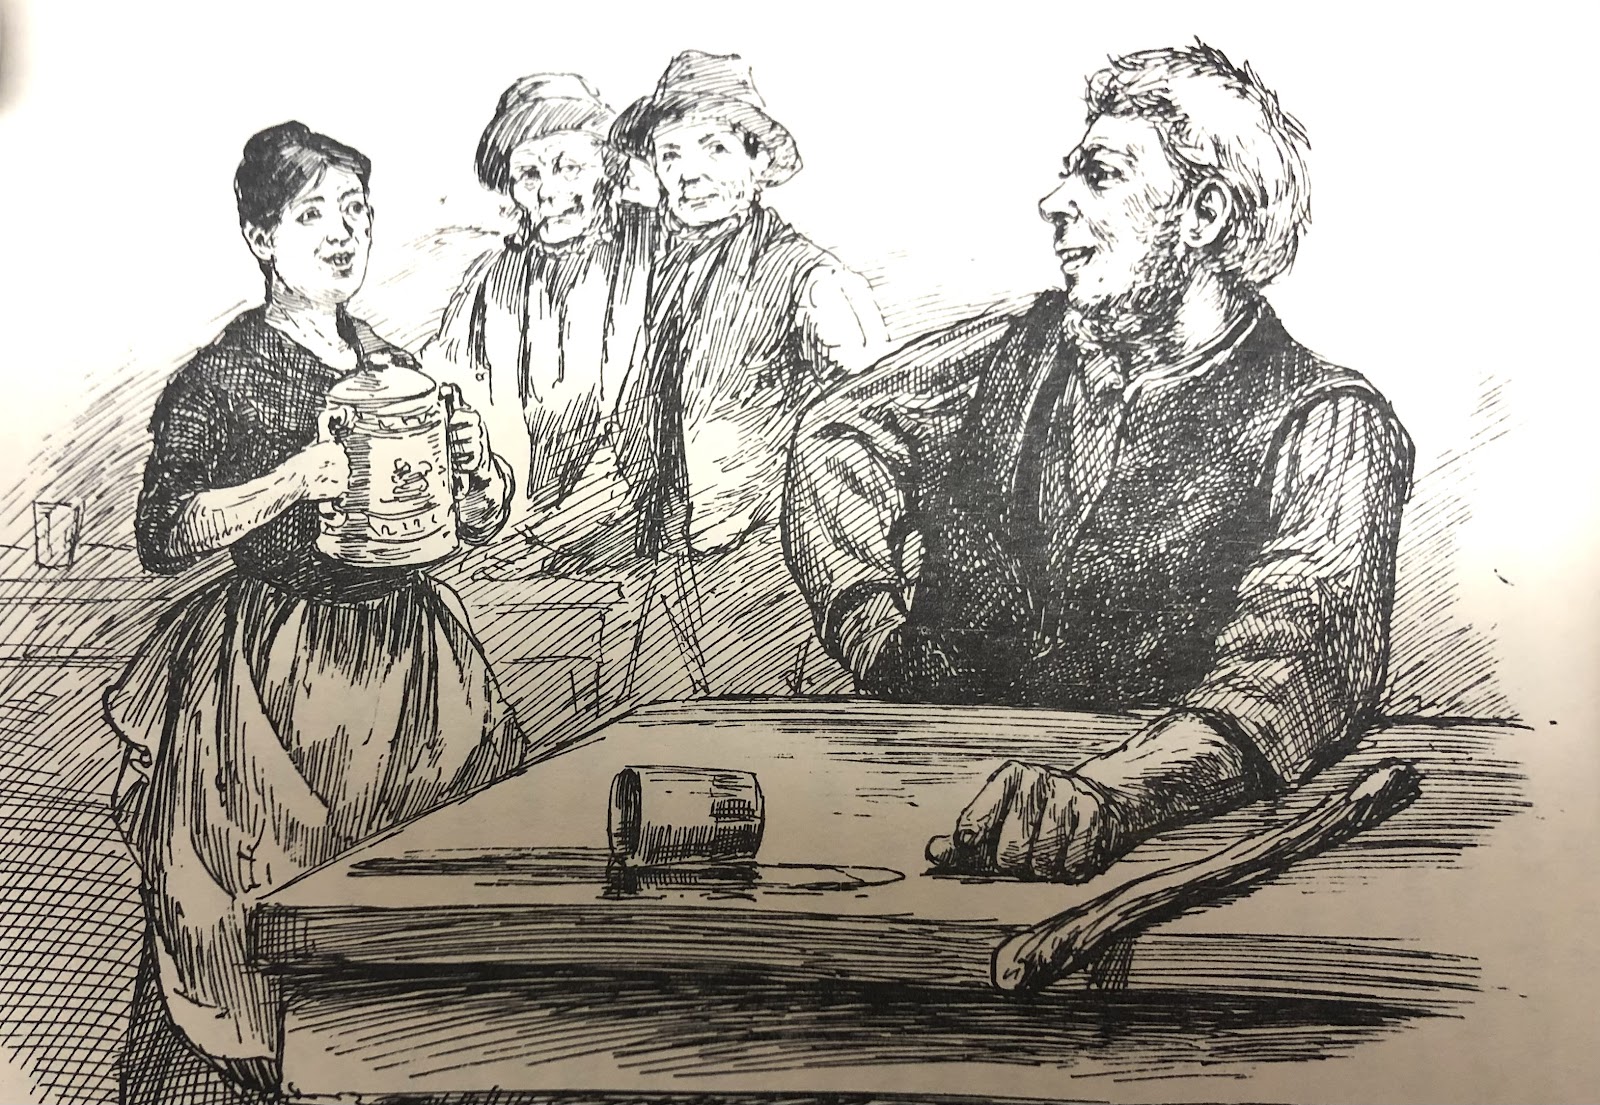 Black and white ink drawing of the Gray Man (a giant) i n a bar talking to a young barmaid. 